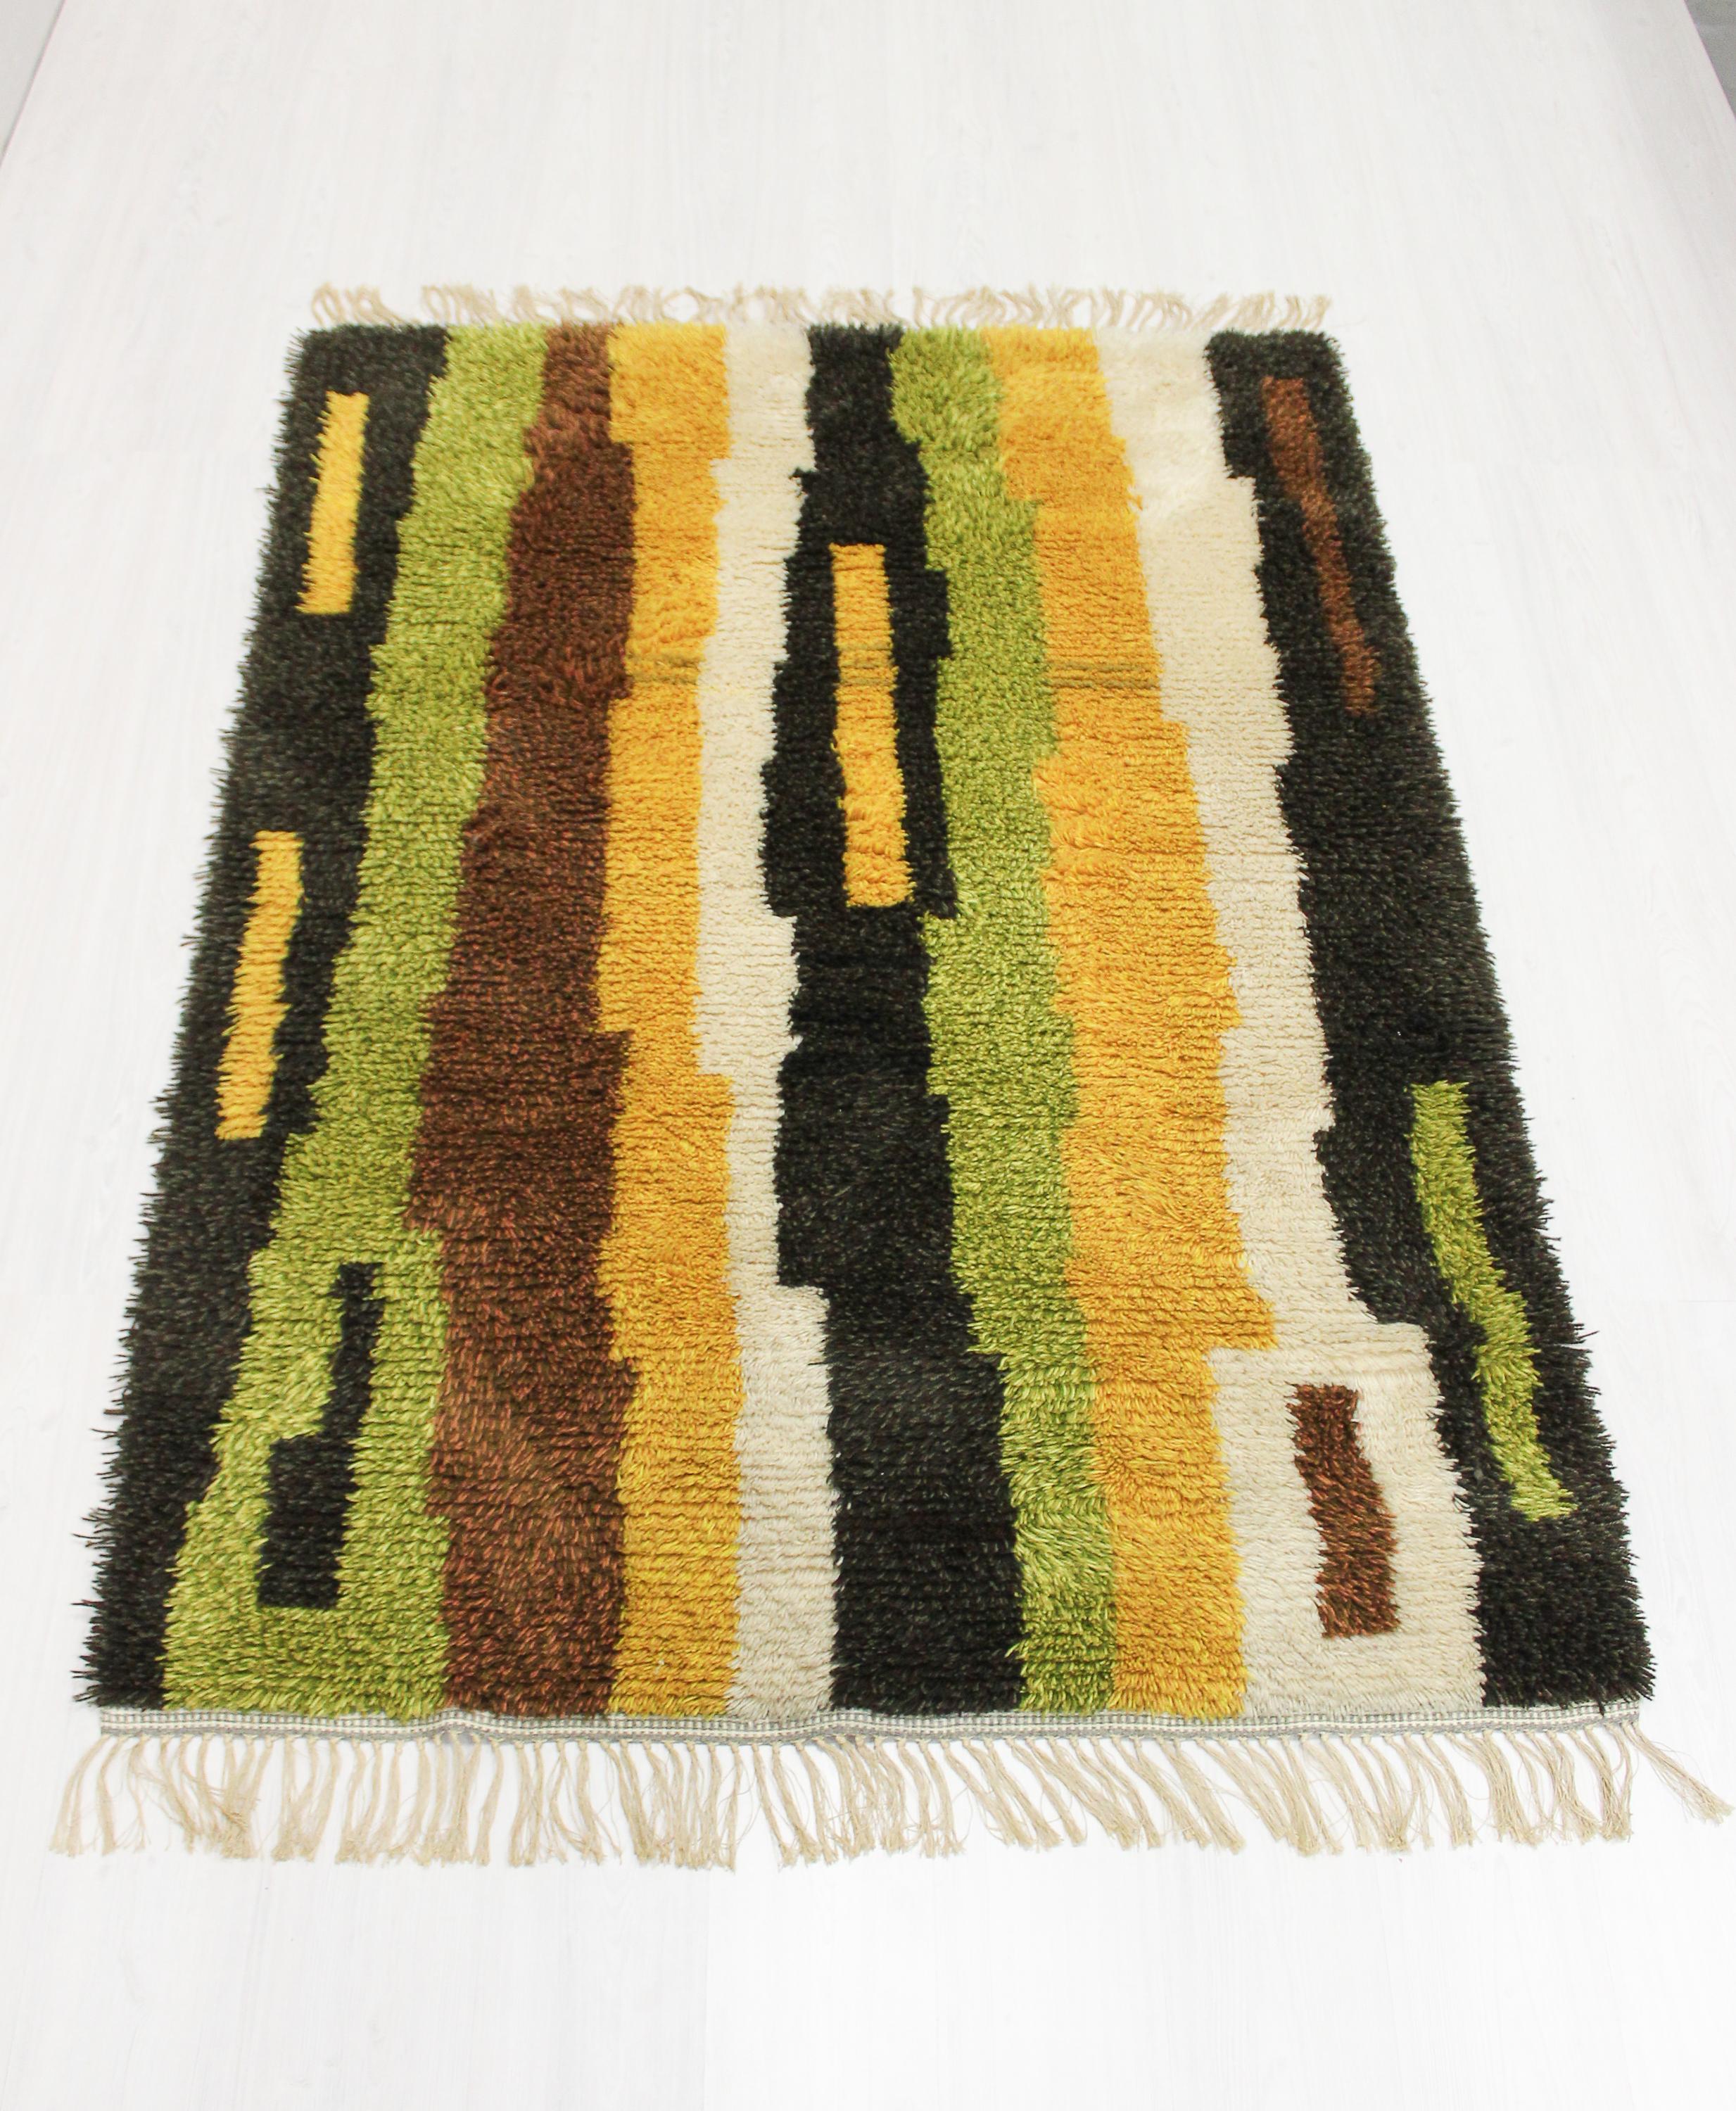 A very decorative Swedish rya rug from the 1960s. A beautiful color pallet and abstract design. Very good vintage condition with minor signs of usage.